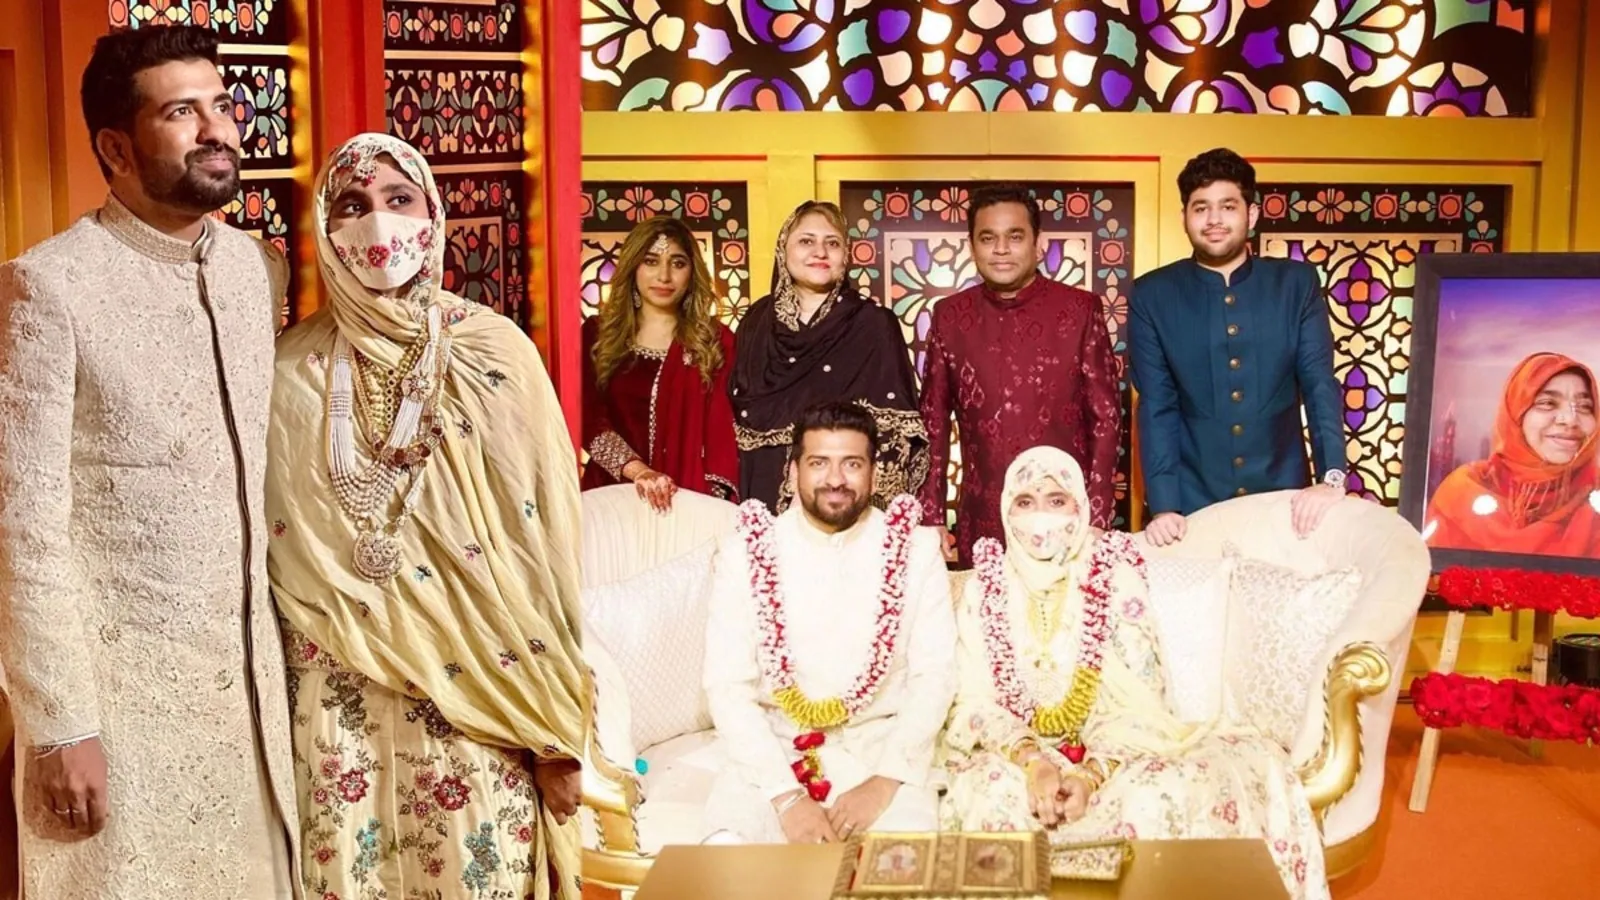 AR Rahman’s daughter Khatija Rahman gets married, she calls it ‘most awaited day in my life’. See pics